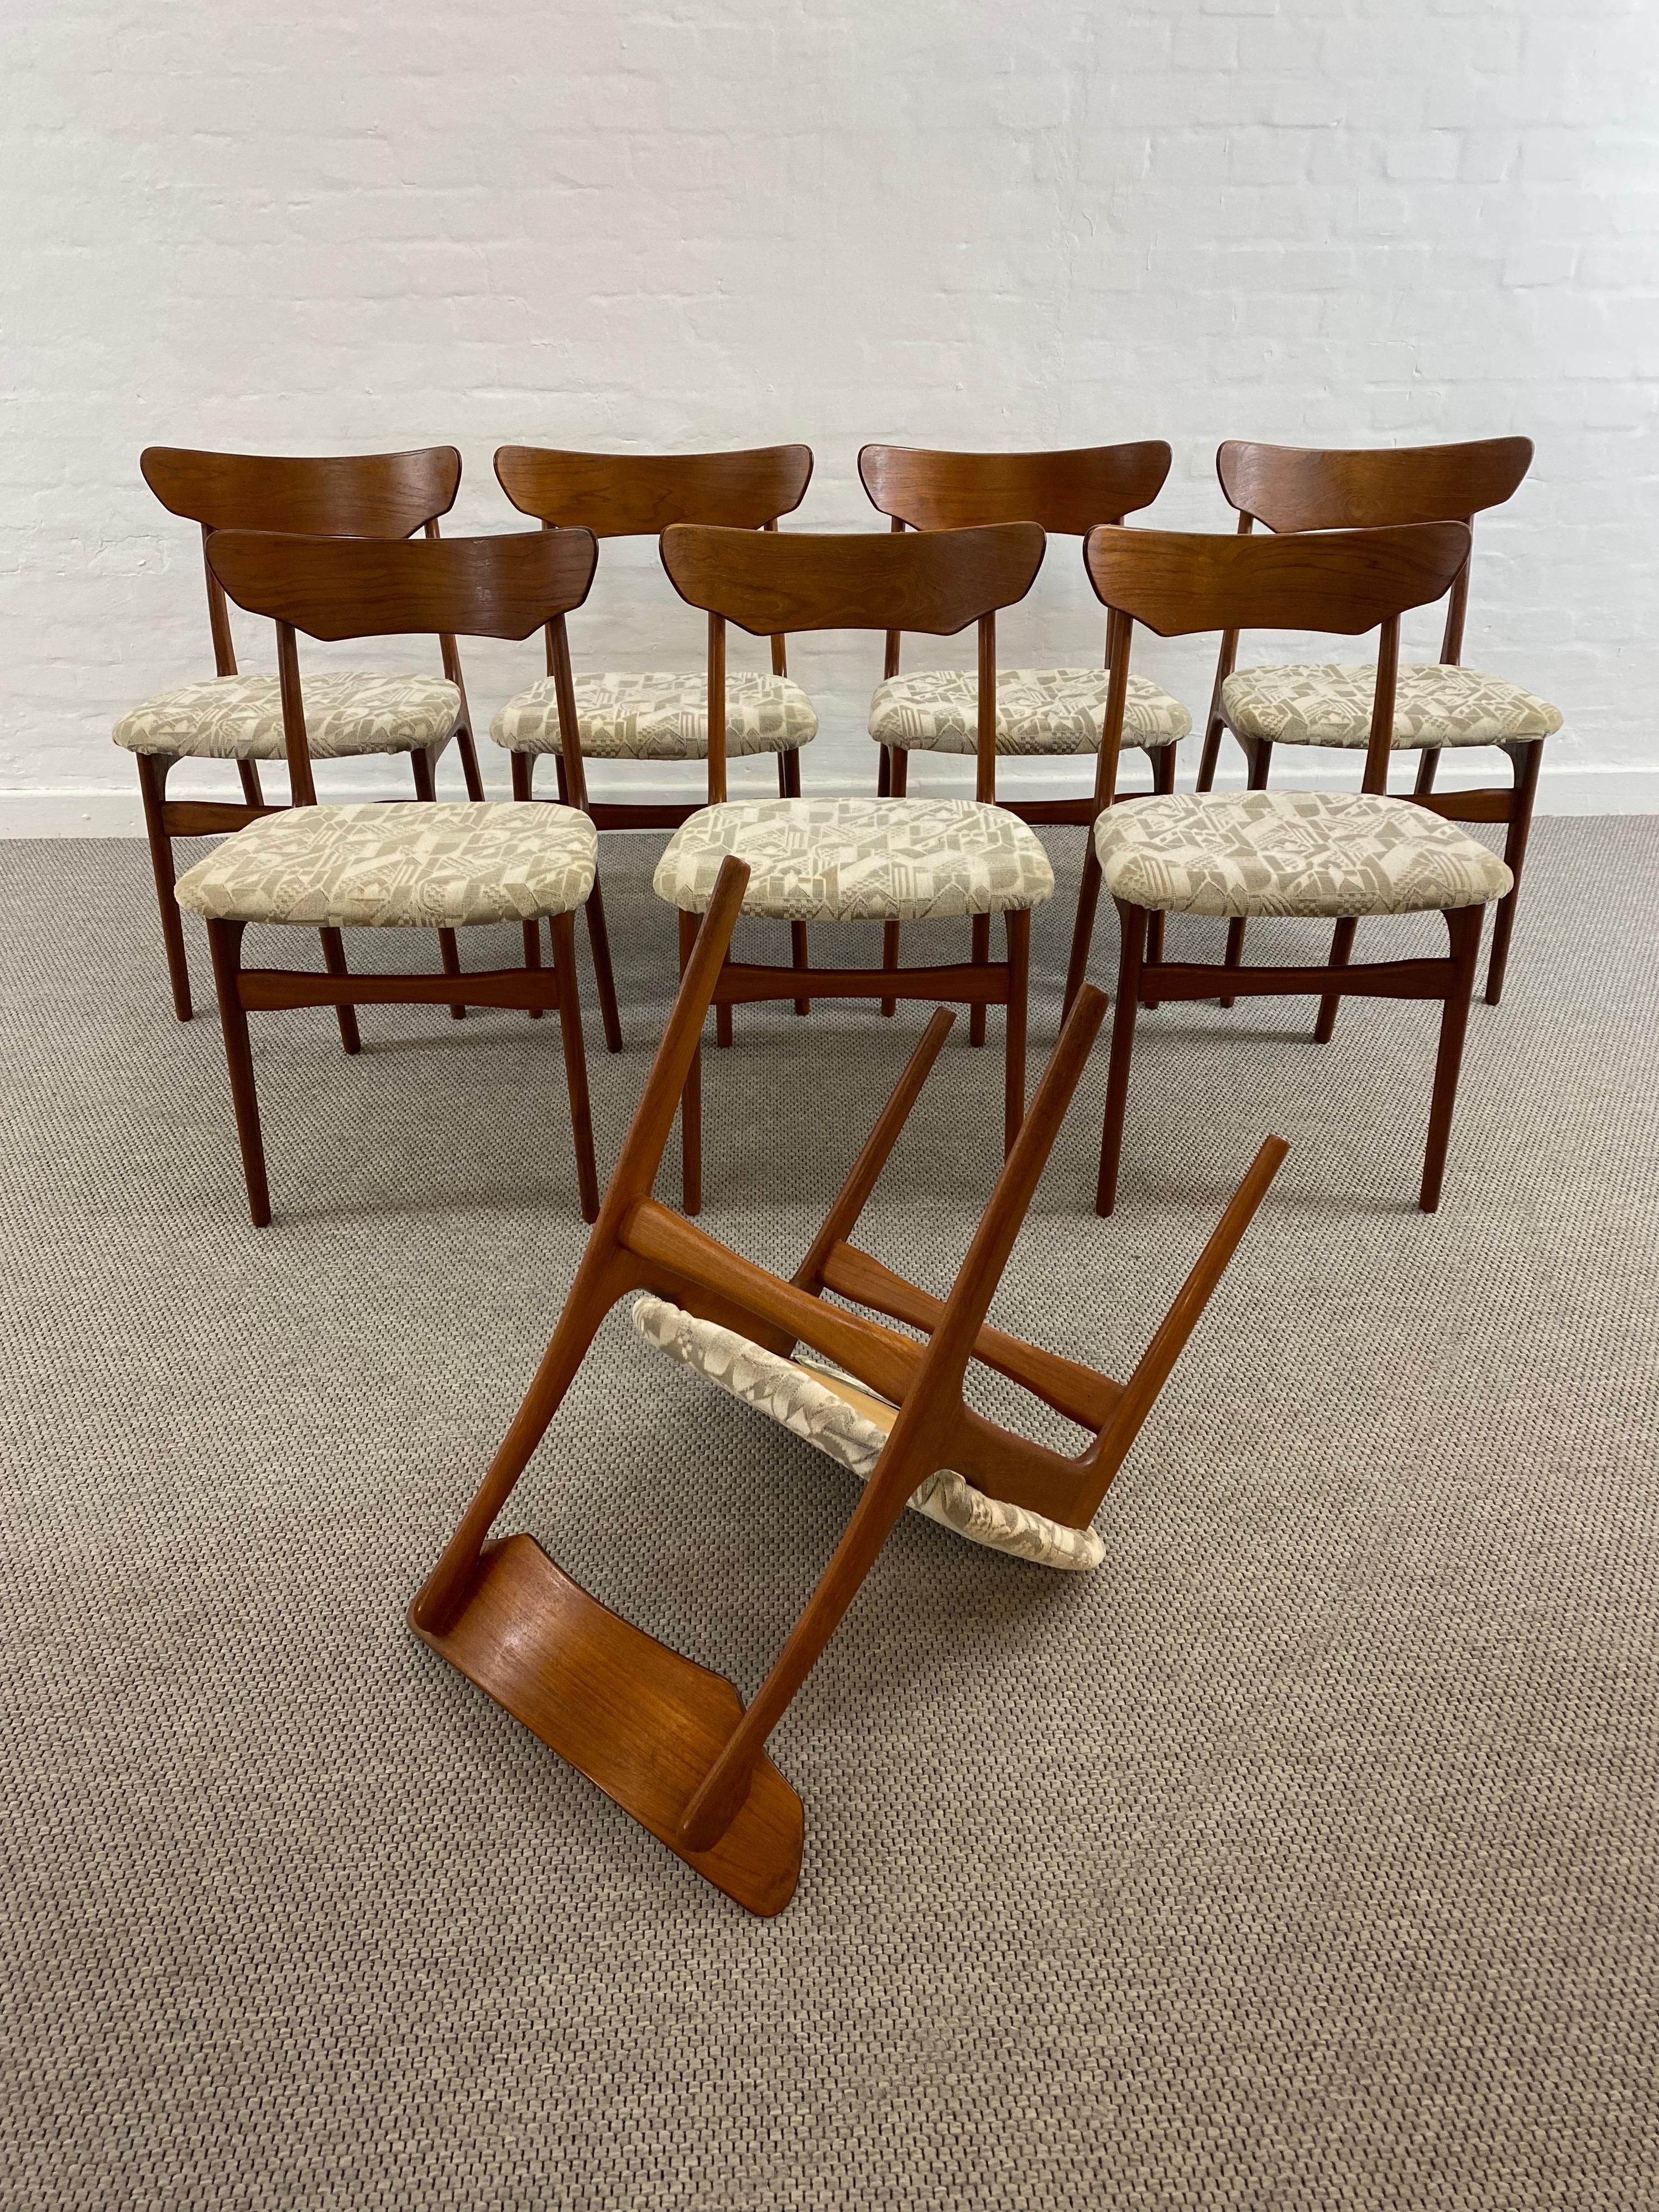 Mid-20th Century Set of 8 Midcentury Teak Dining Chairs from Schionning & Elgaard, Denmark, 1960s